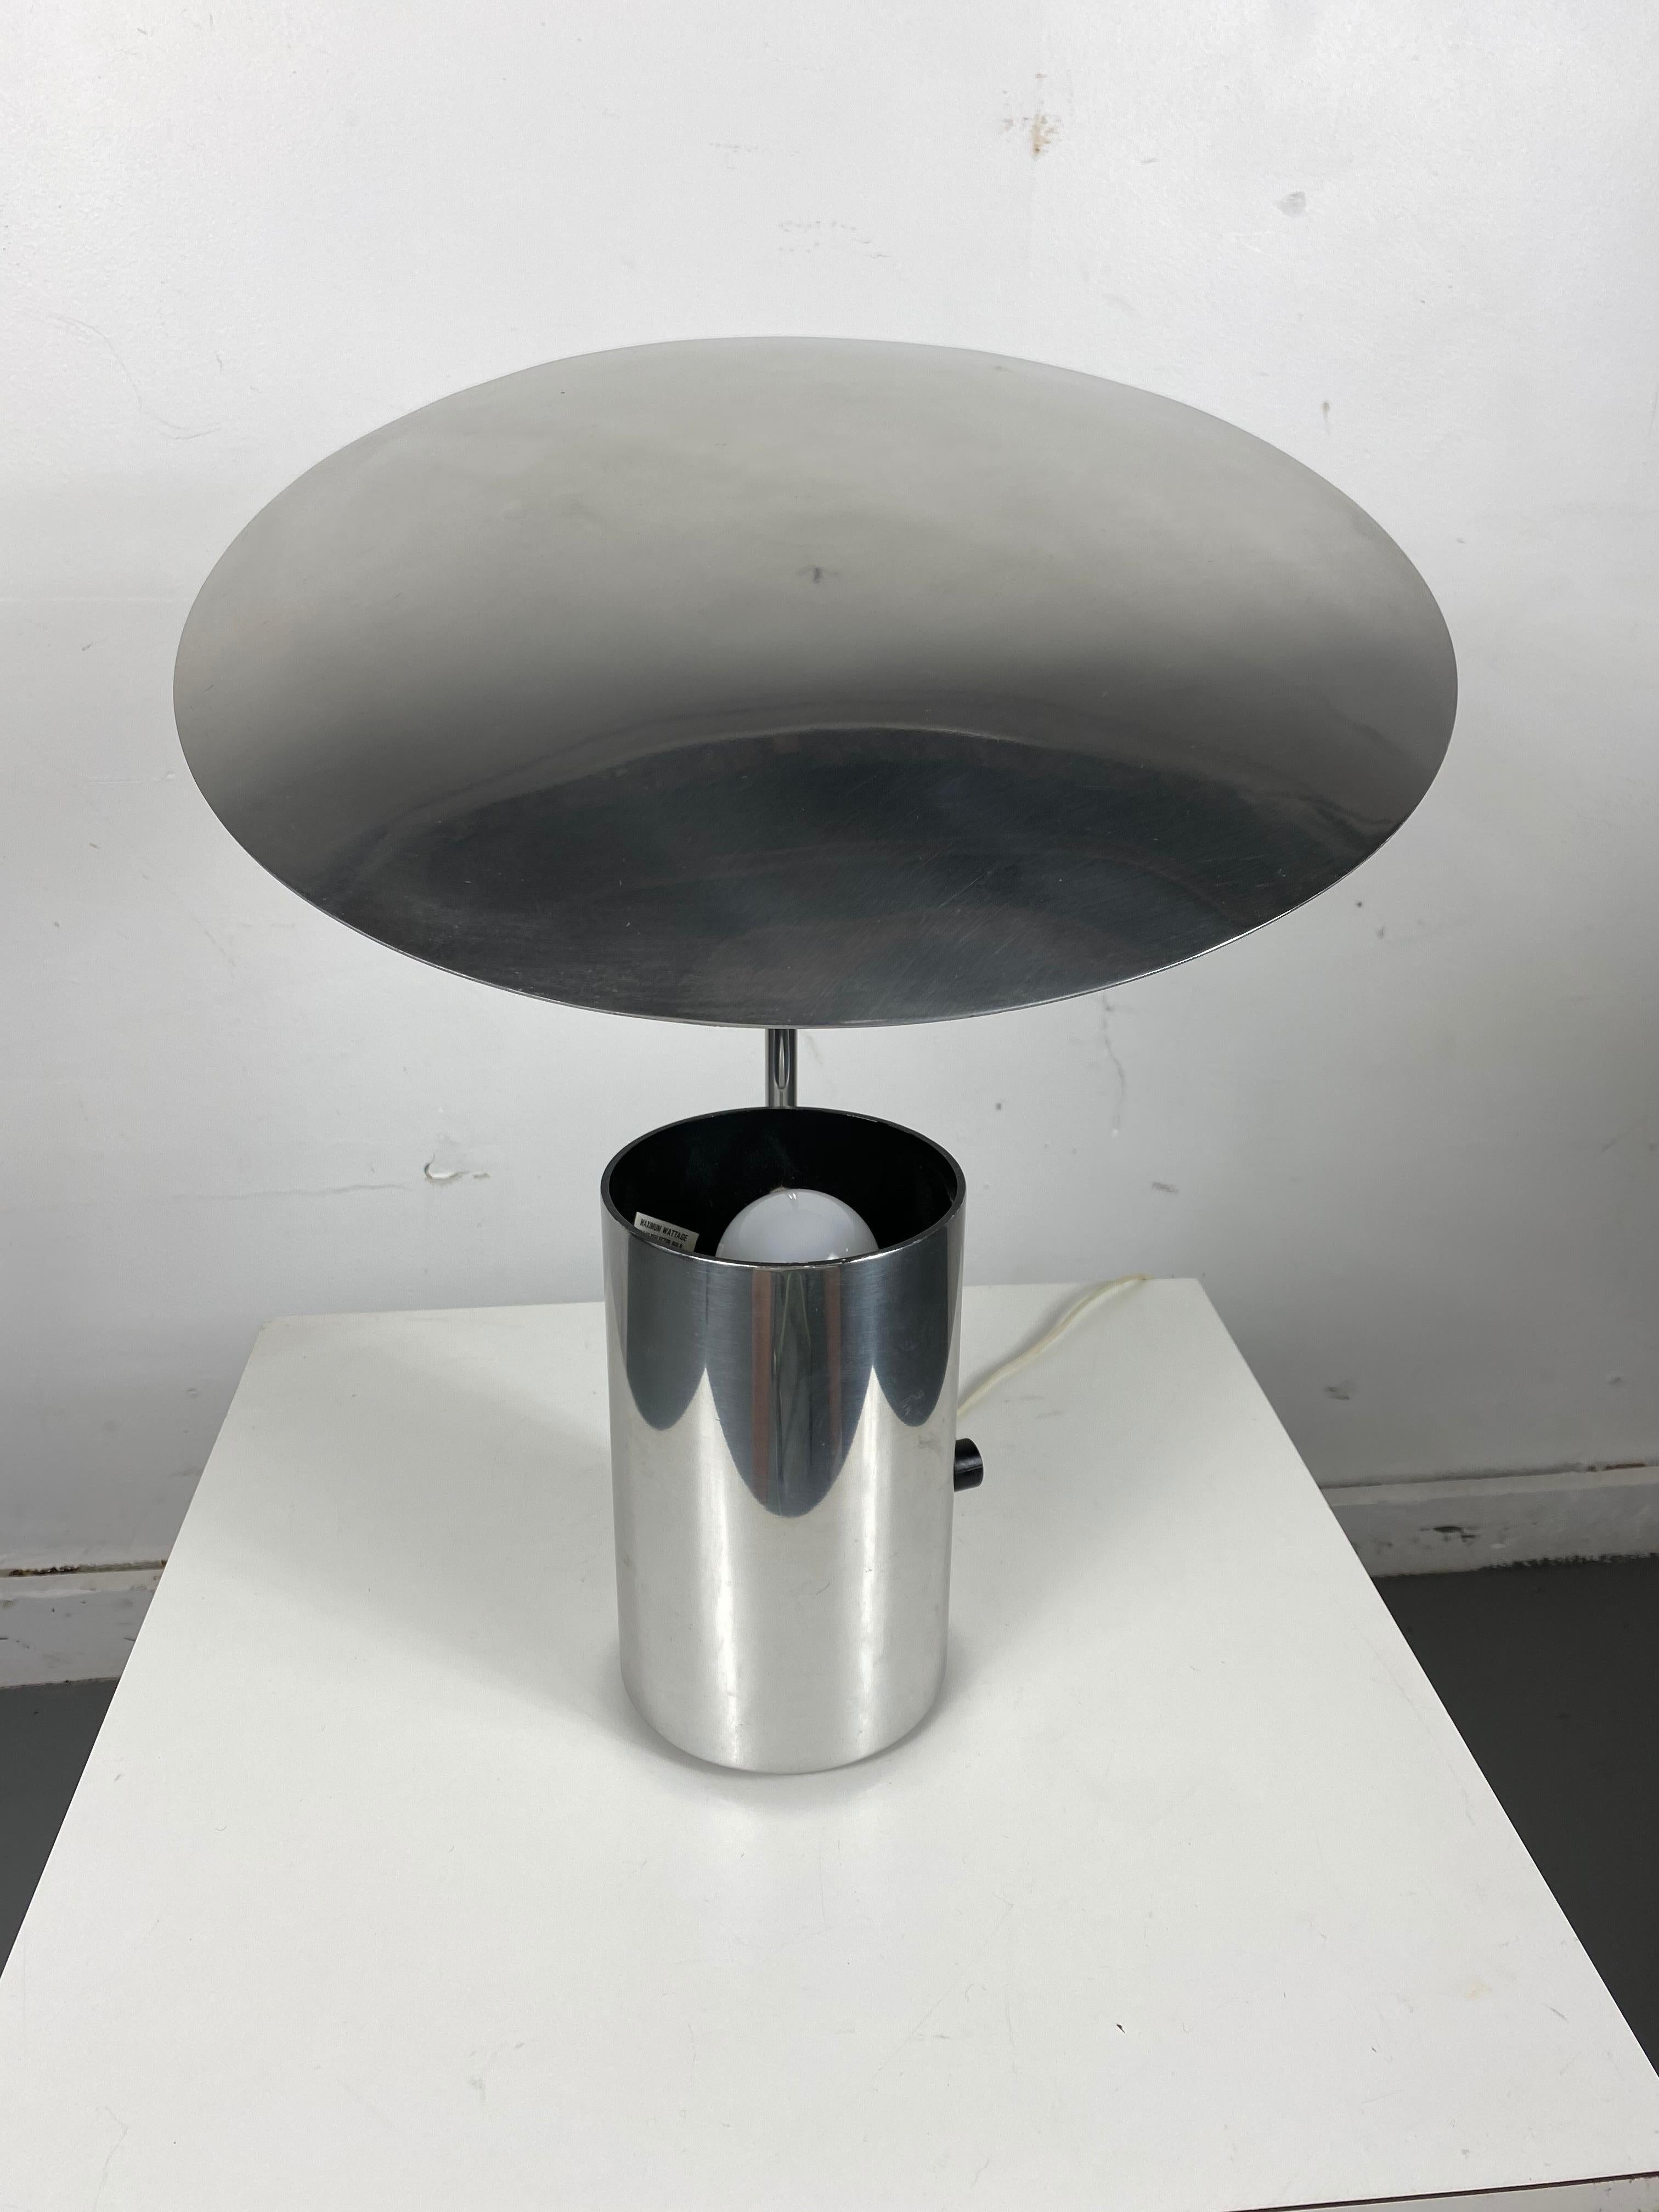 Classic 20th century design. Super clean, all chromed metal geometric modern table lamp, adjustable shade, light bulb sits in a cylindrical base design. Designed by George Nelson, manufactured by Koch & Lowy, superior quality, amazing design.